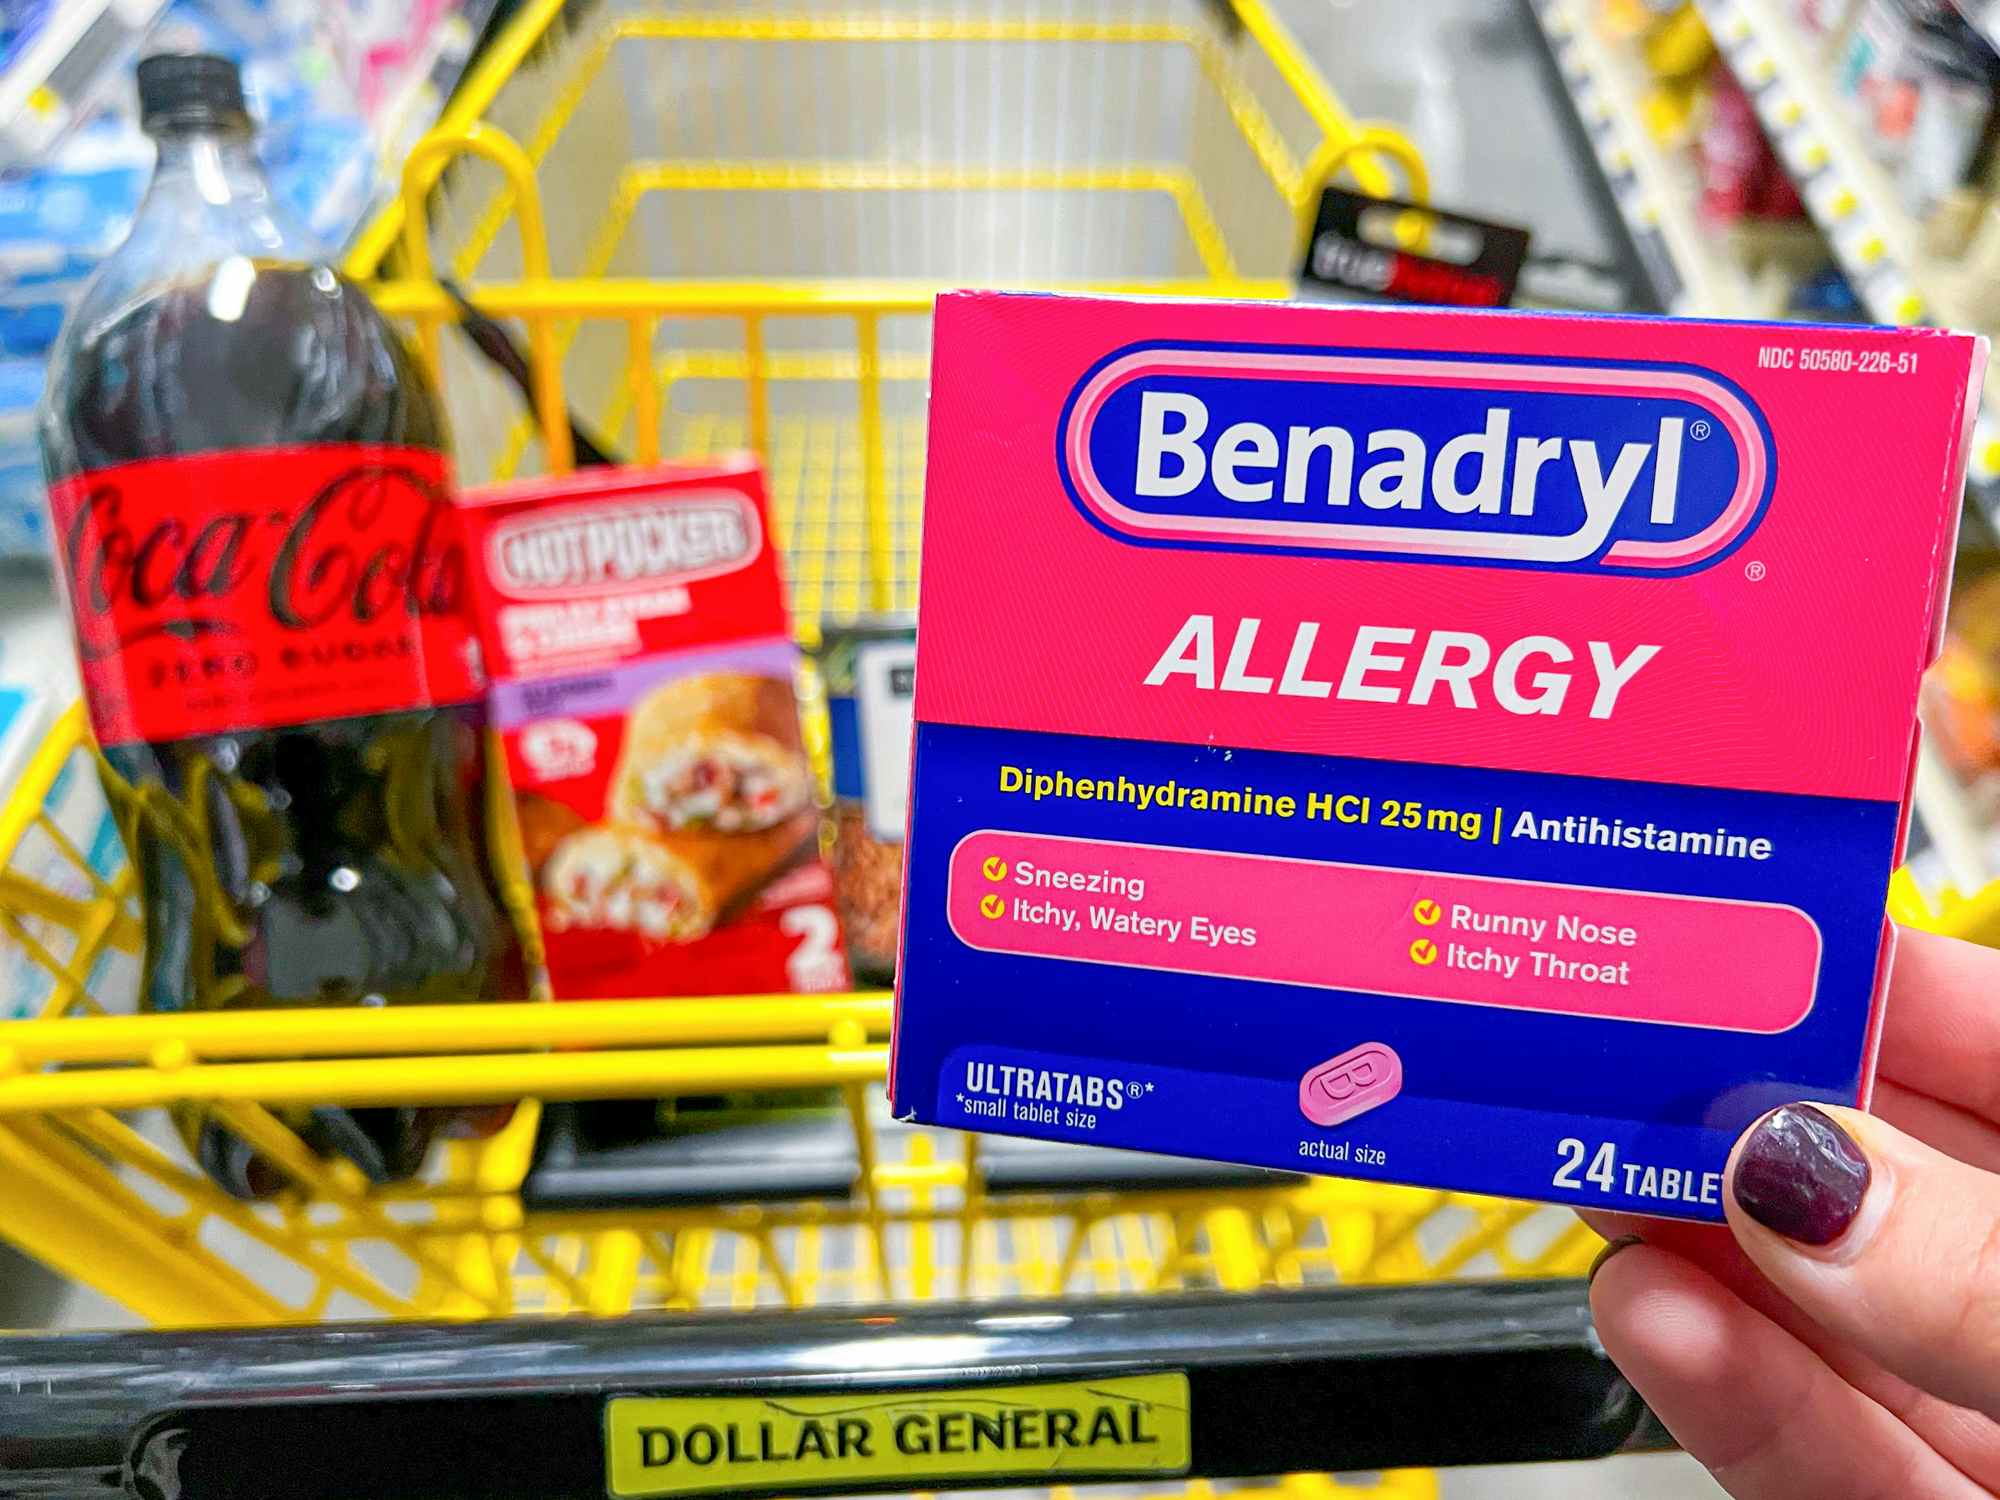 Someone holding up a box of Benadryl allergy medication next to a cart at Dollar General